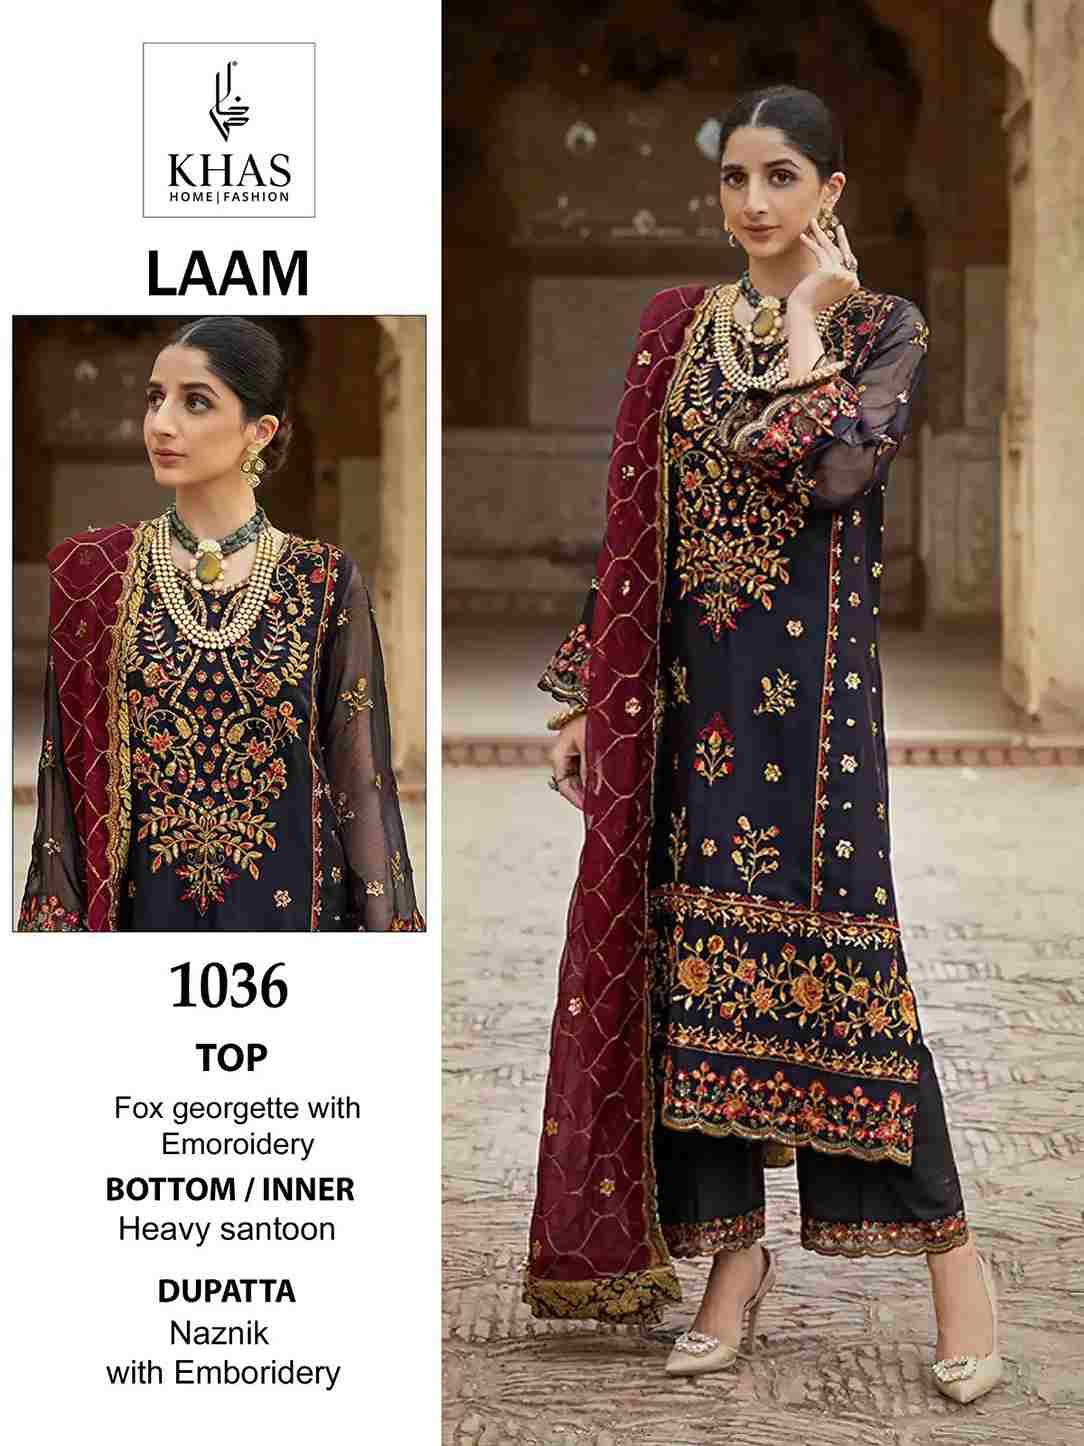 Laam By Khas 135 To 137 Series Beautiful Pakistani Suits Colorful Stylish Fancy Casual Wear & Ethnic Wear Faux Georgette Dresses At Wholesale Price